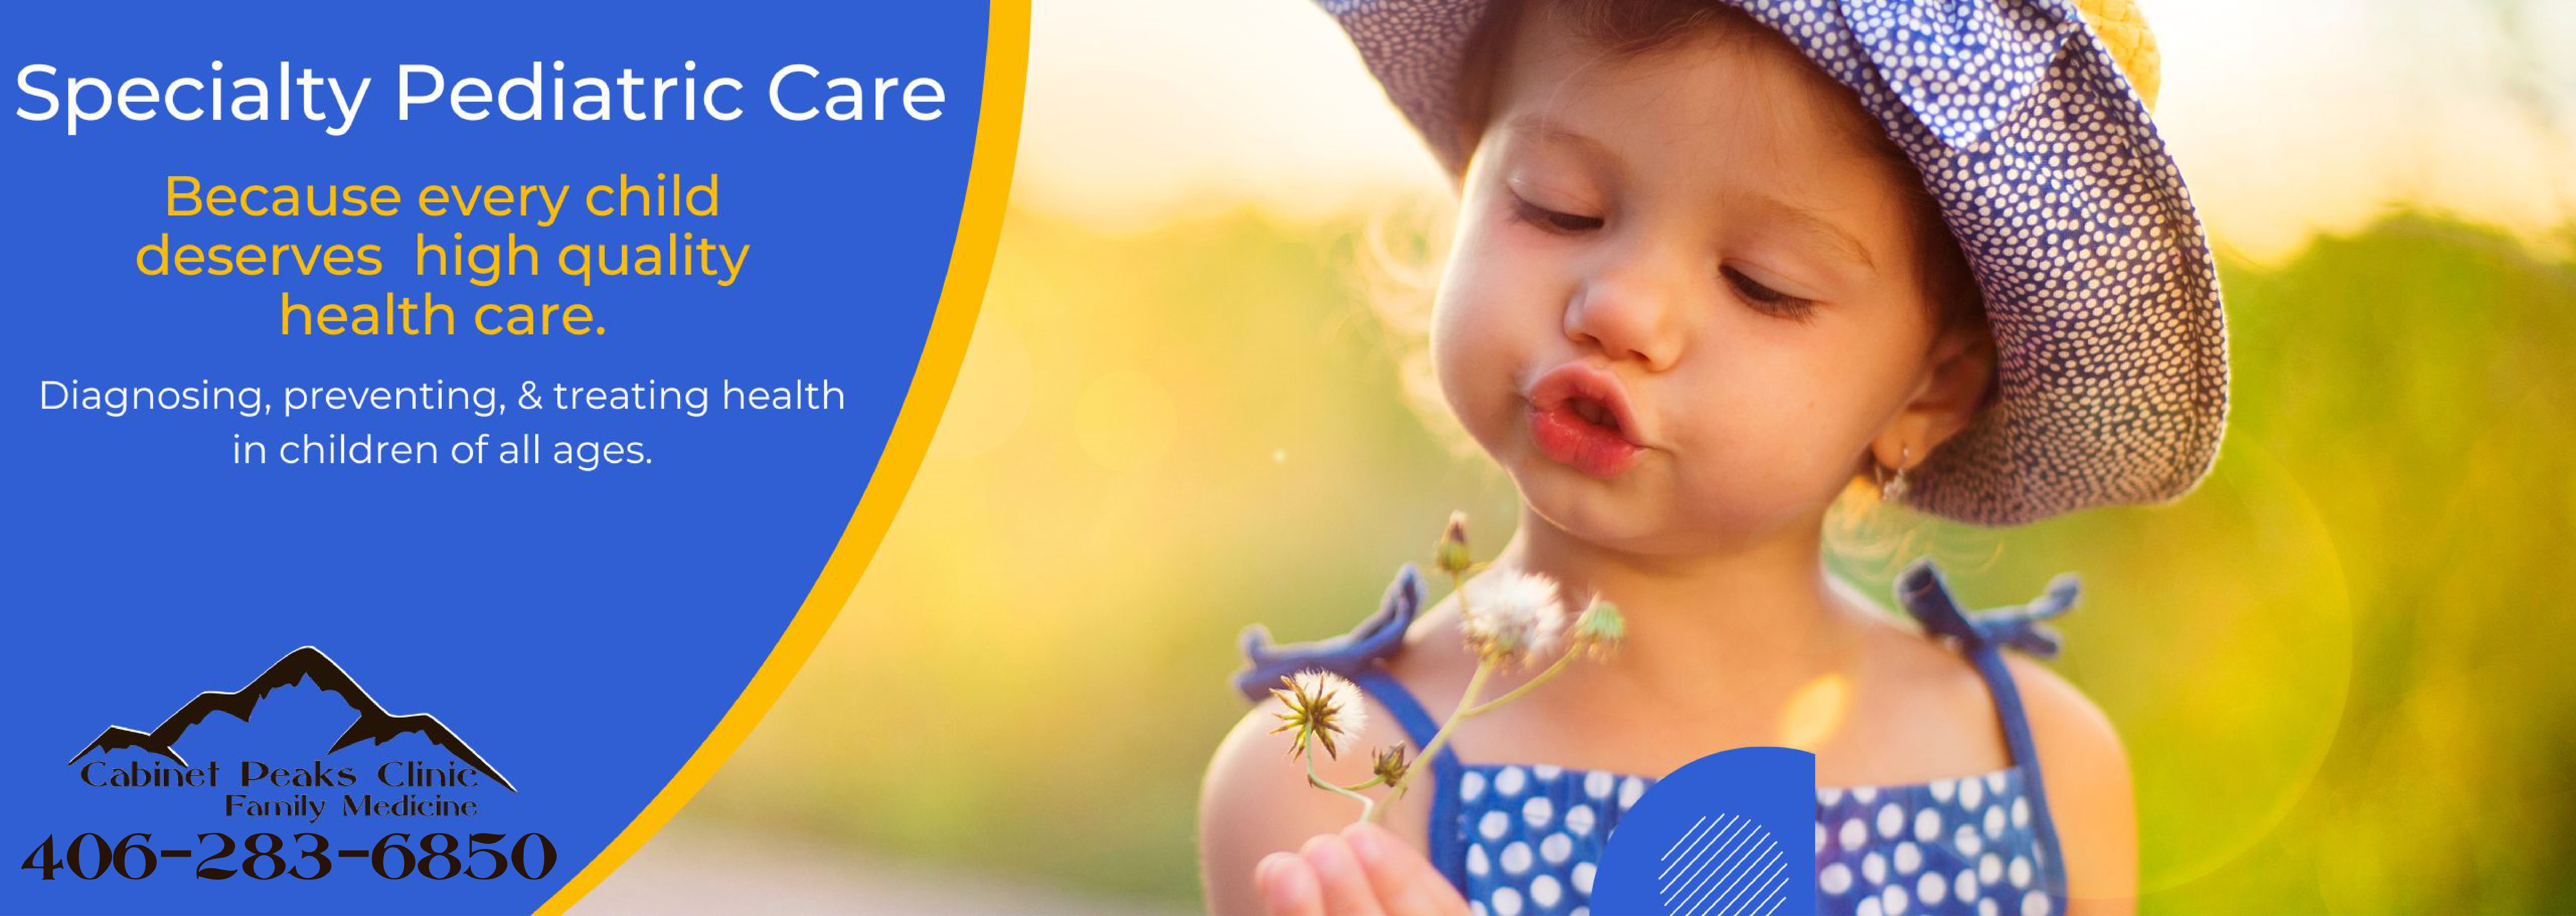 Banner picture of a female toddler holding a dandelion and looking down at it. Banner says:

Specialty Pediatric Care

Because every child deserves high quality health care.

Diagnosing, preventing, & treating health in children of all ages.

(Cabinet Peaks Clinic Family Medicine (Mountain outline logo) 406-283-6850